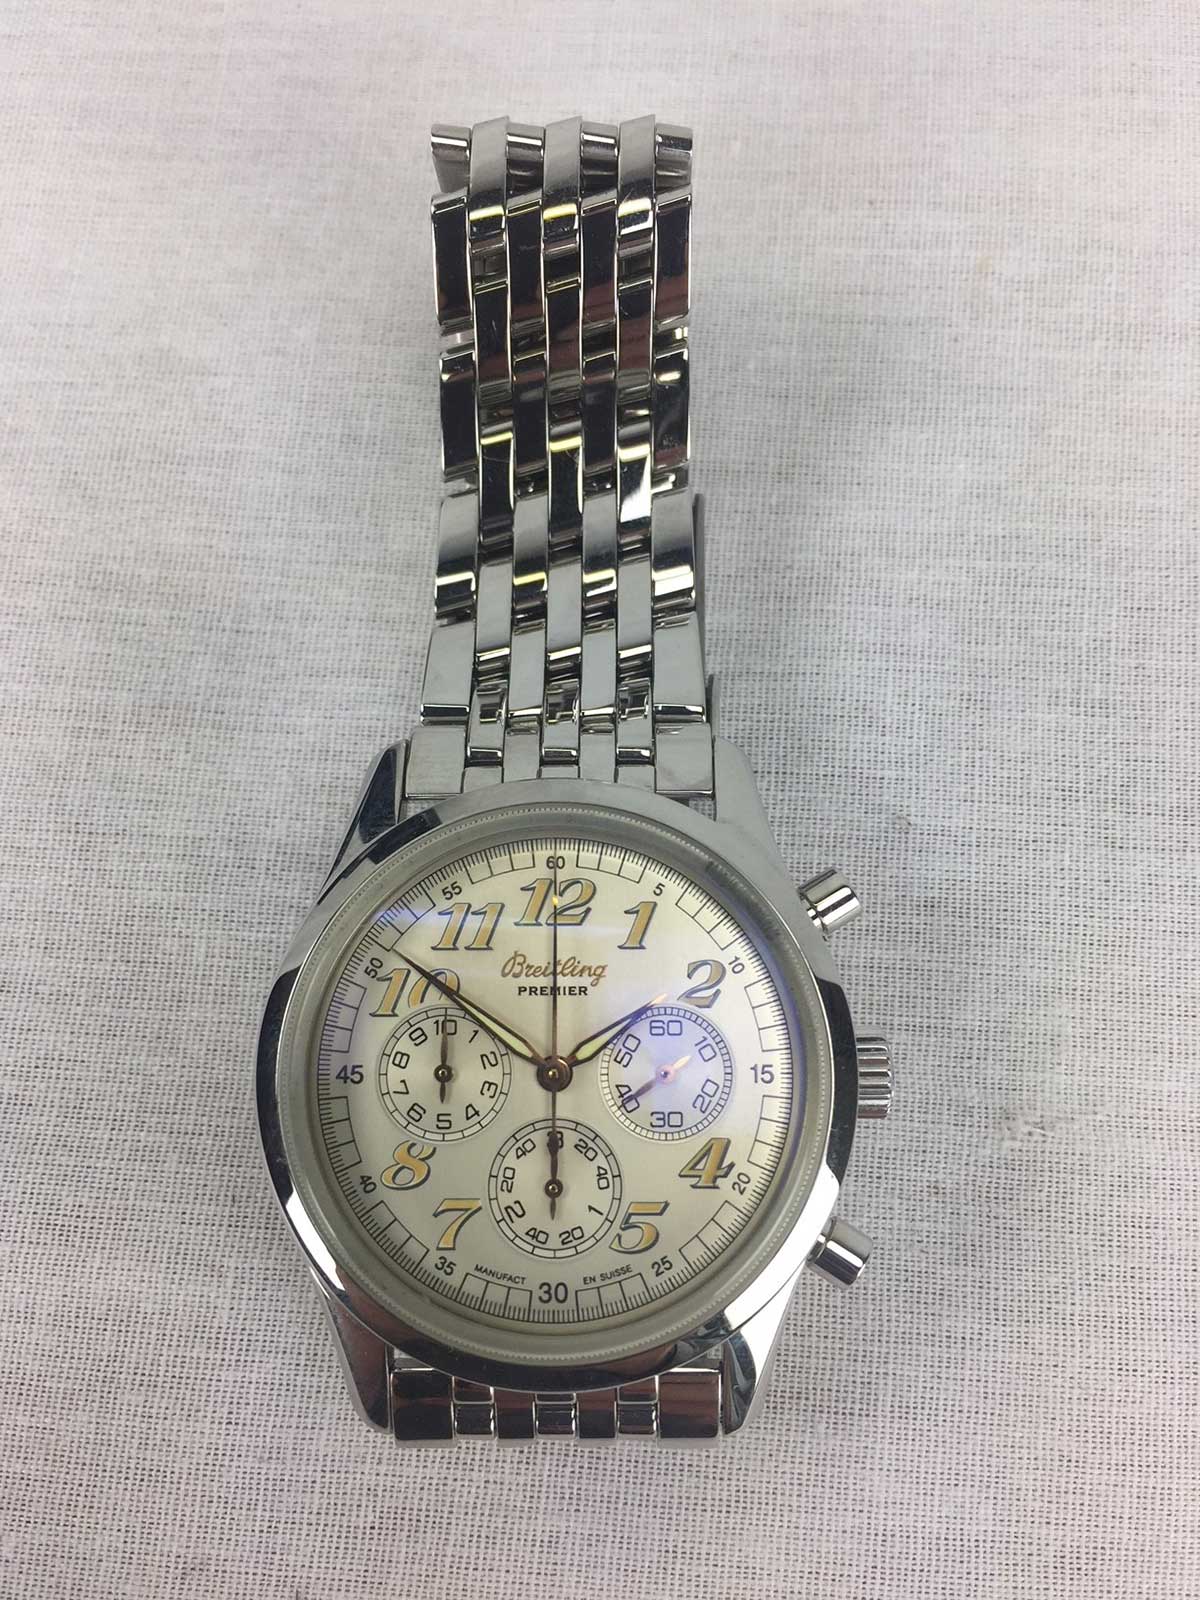 Premier Breitling wristwatch with a silver dial, aviation numerals and a steel bracelet